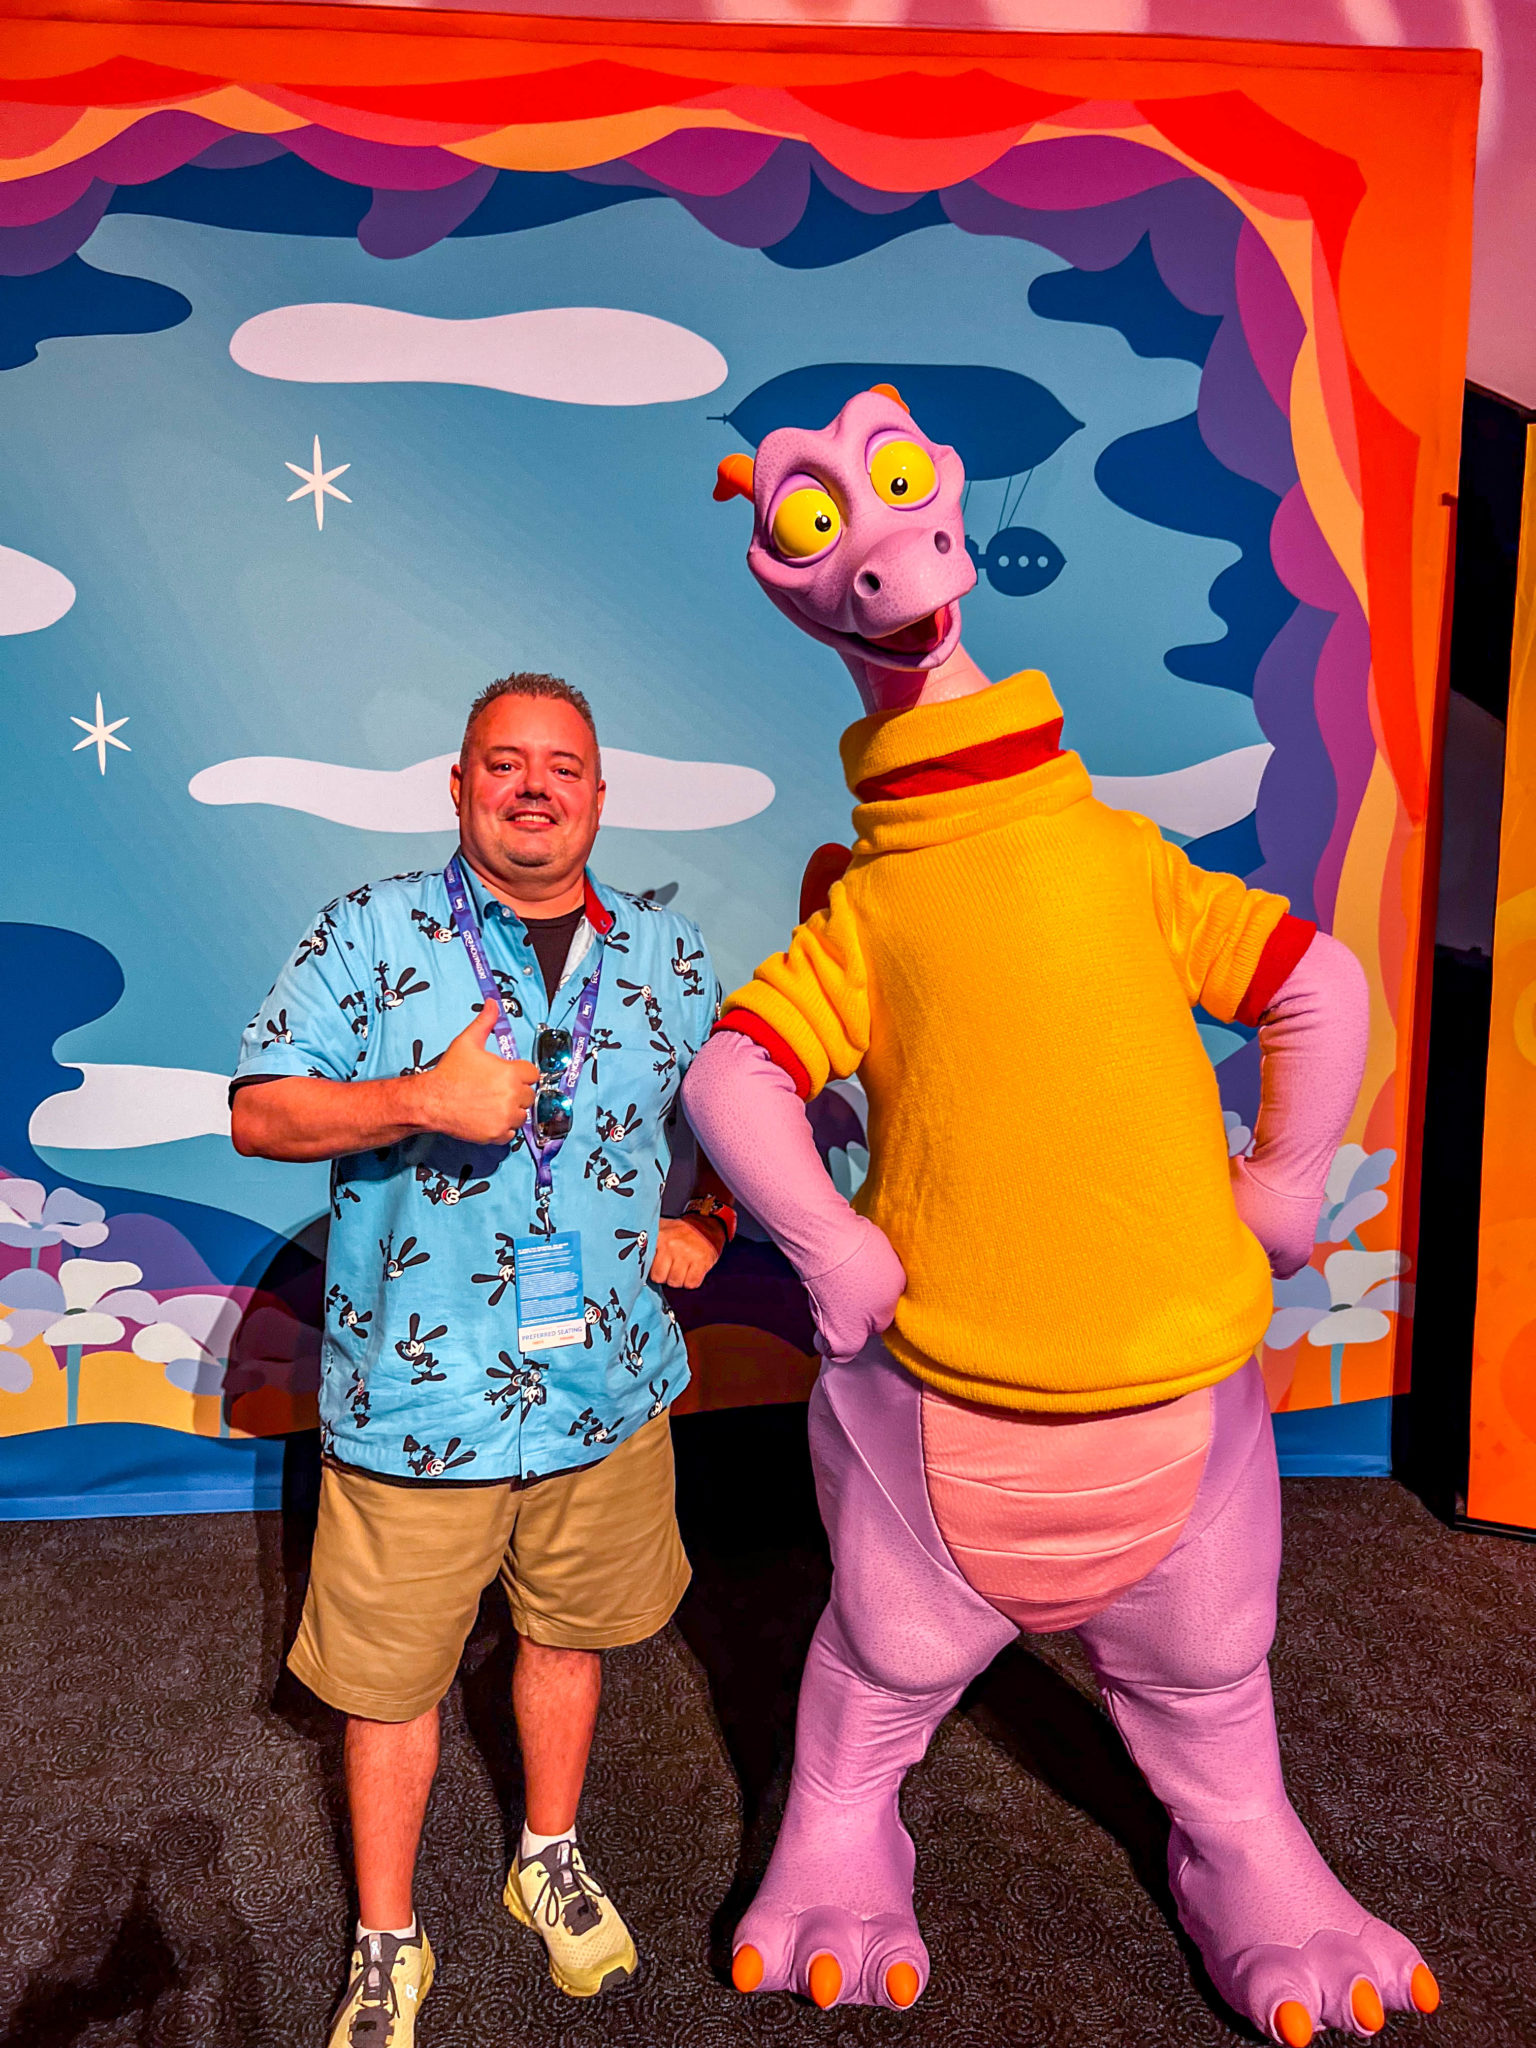 PHOTOS & VIDEO Watch Us Meet Figment in EPCOT!